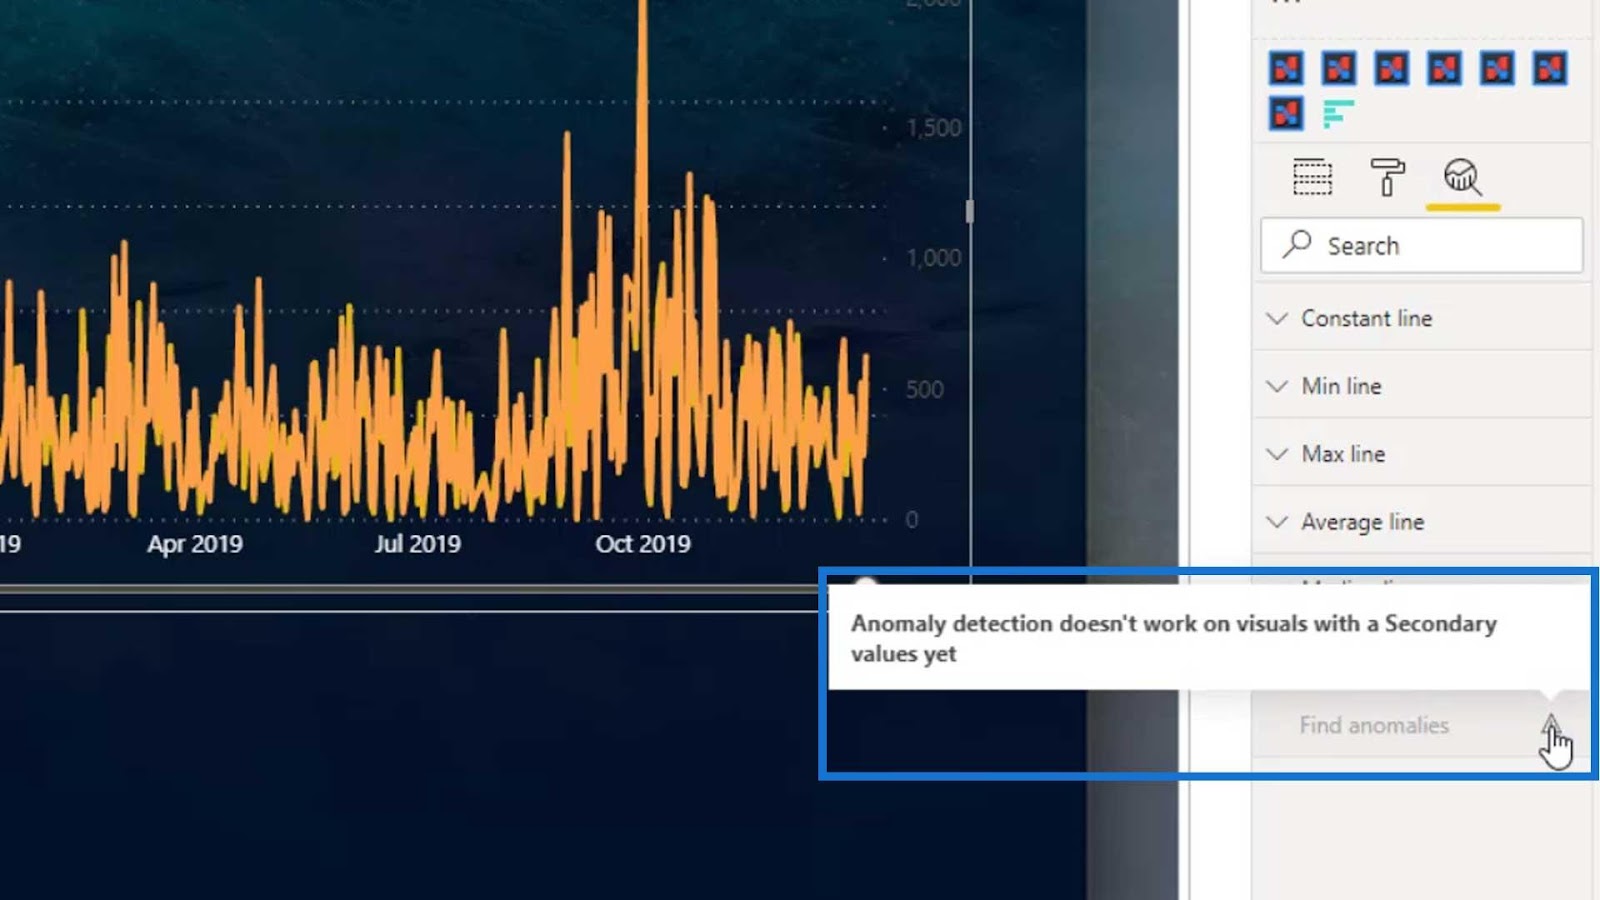 Anomaly Detection in Power BI